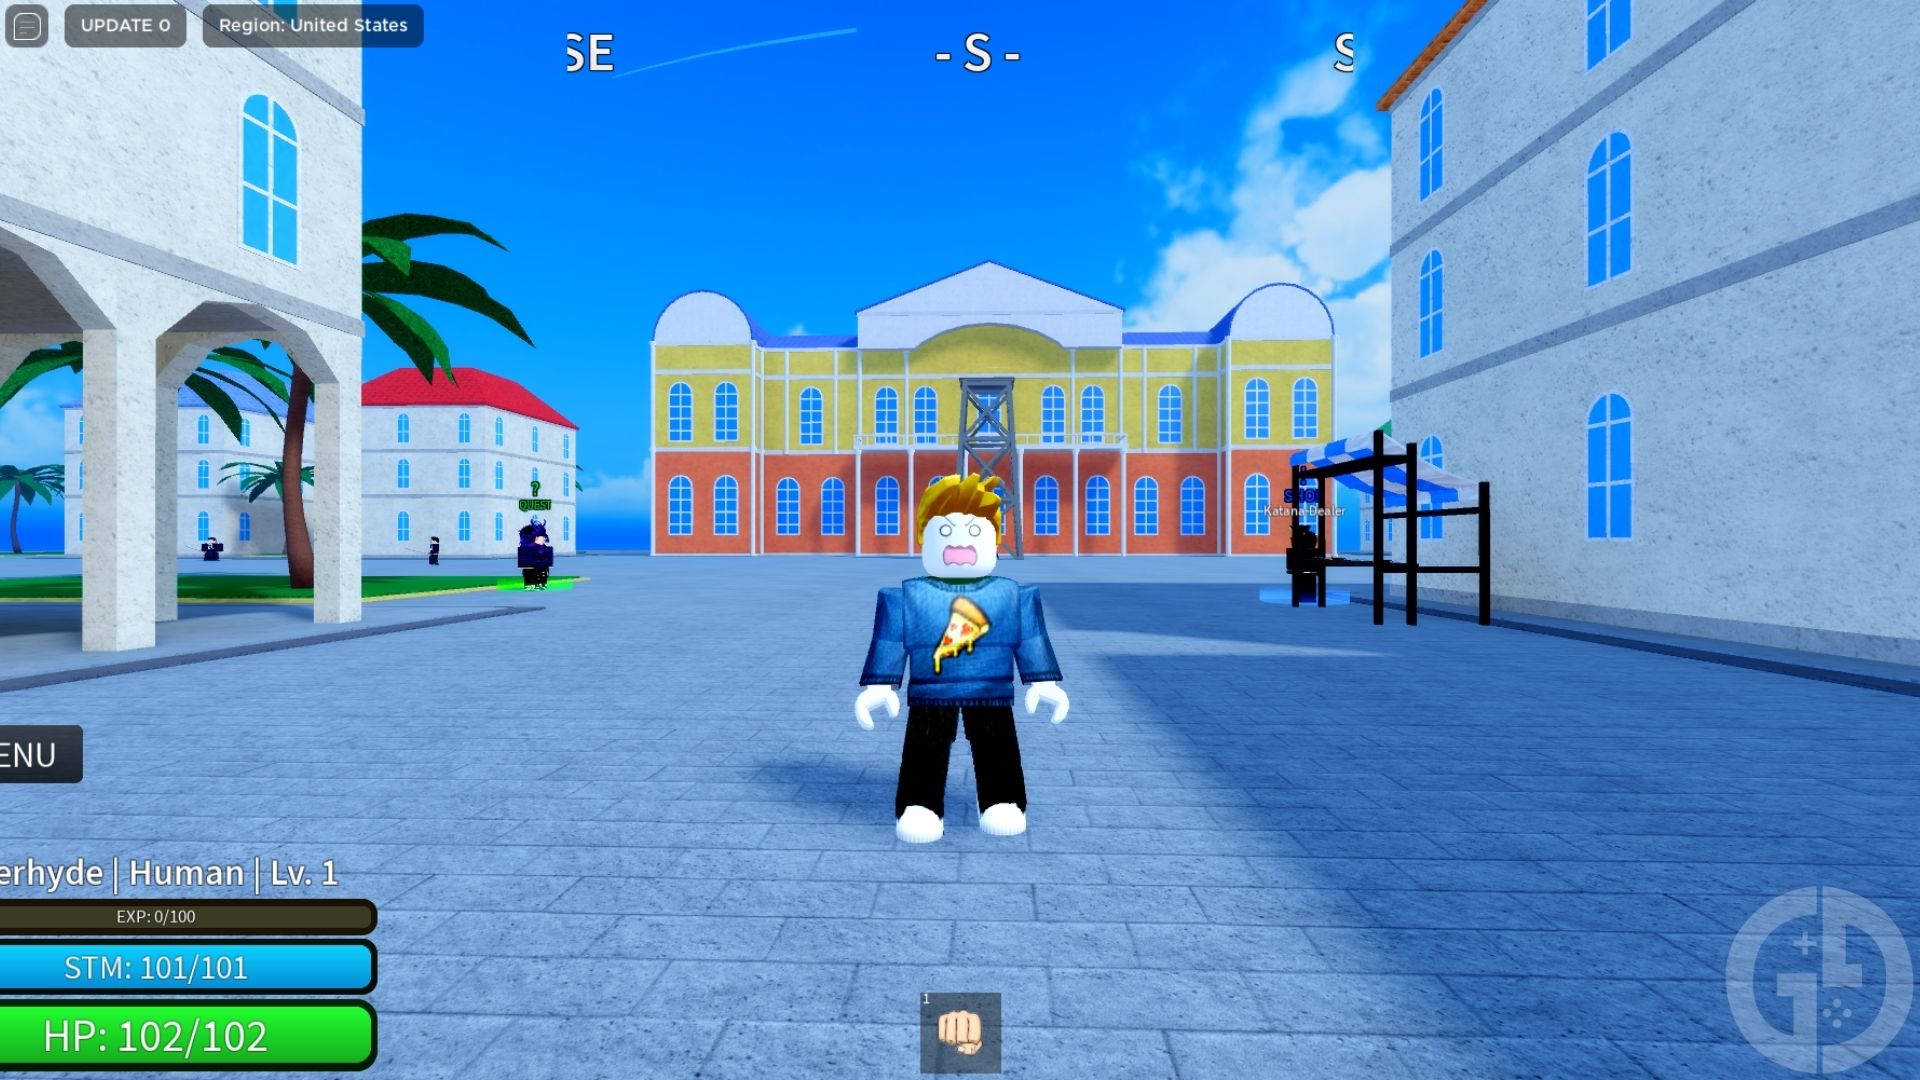 Roblox 101: How To Make Real Money From Your Video Games